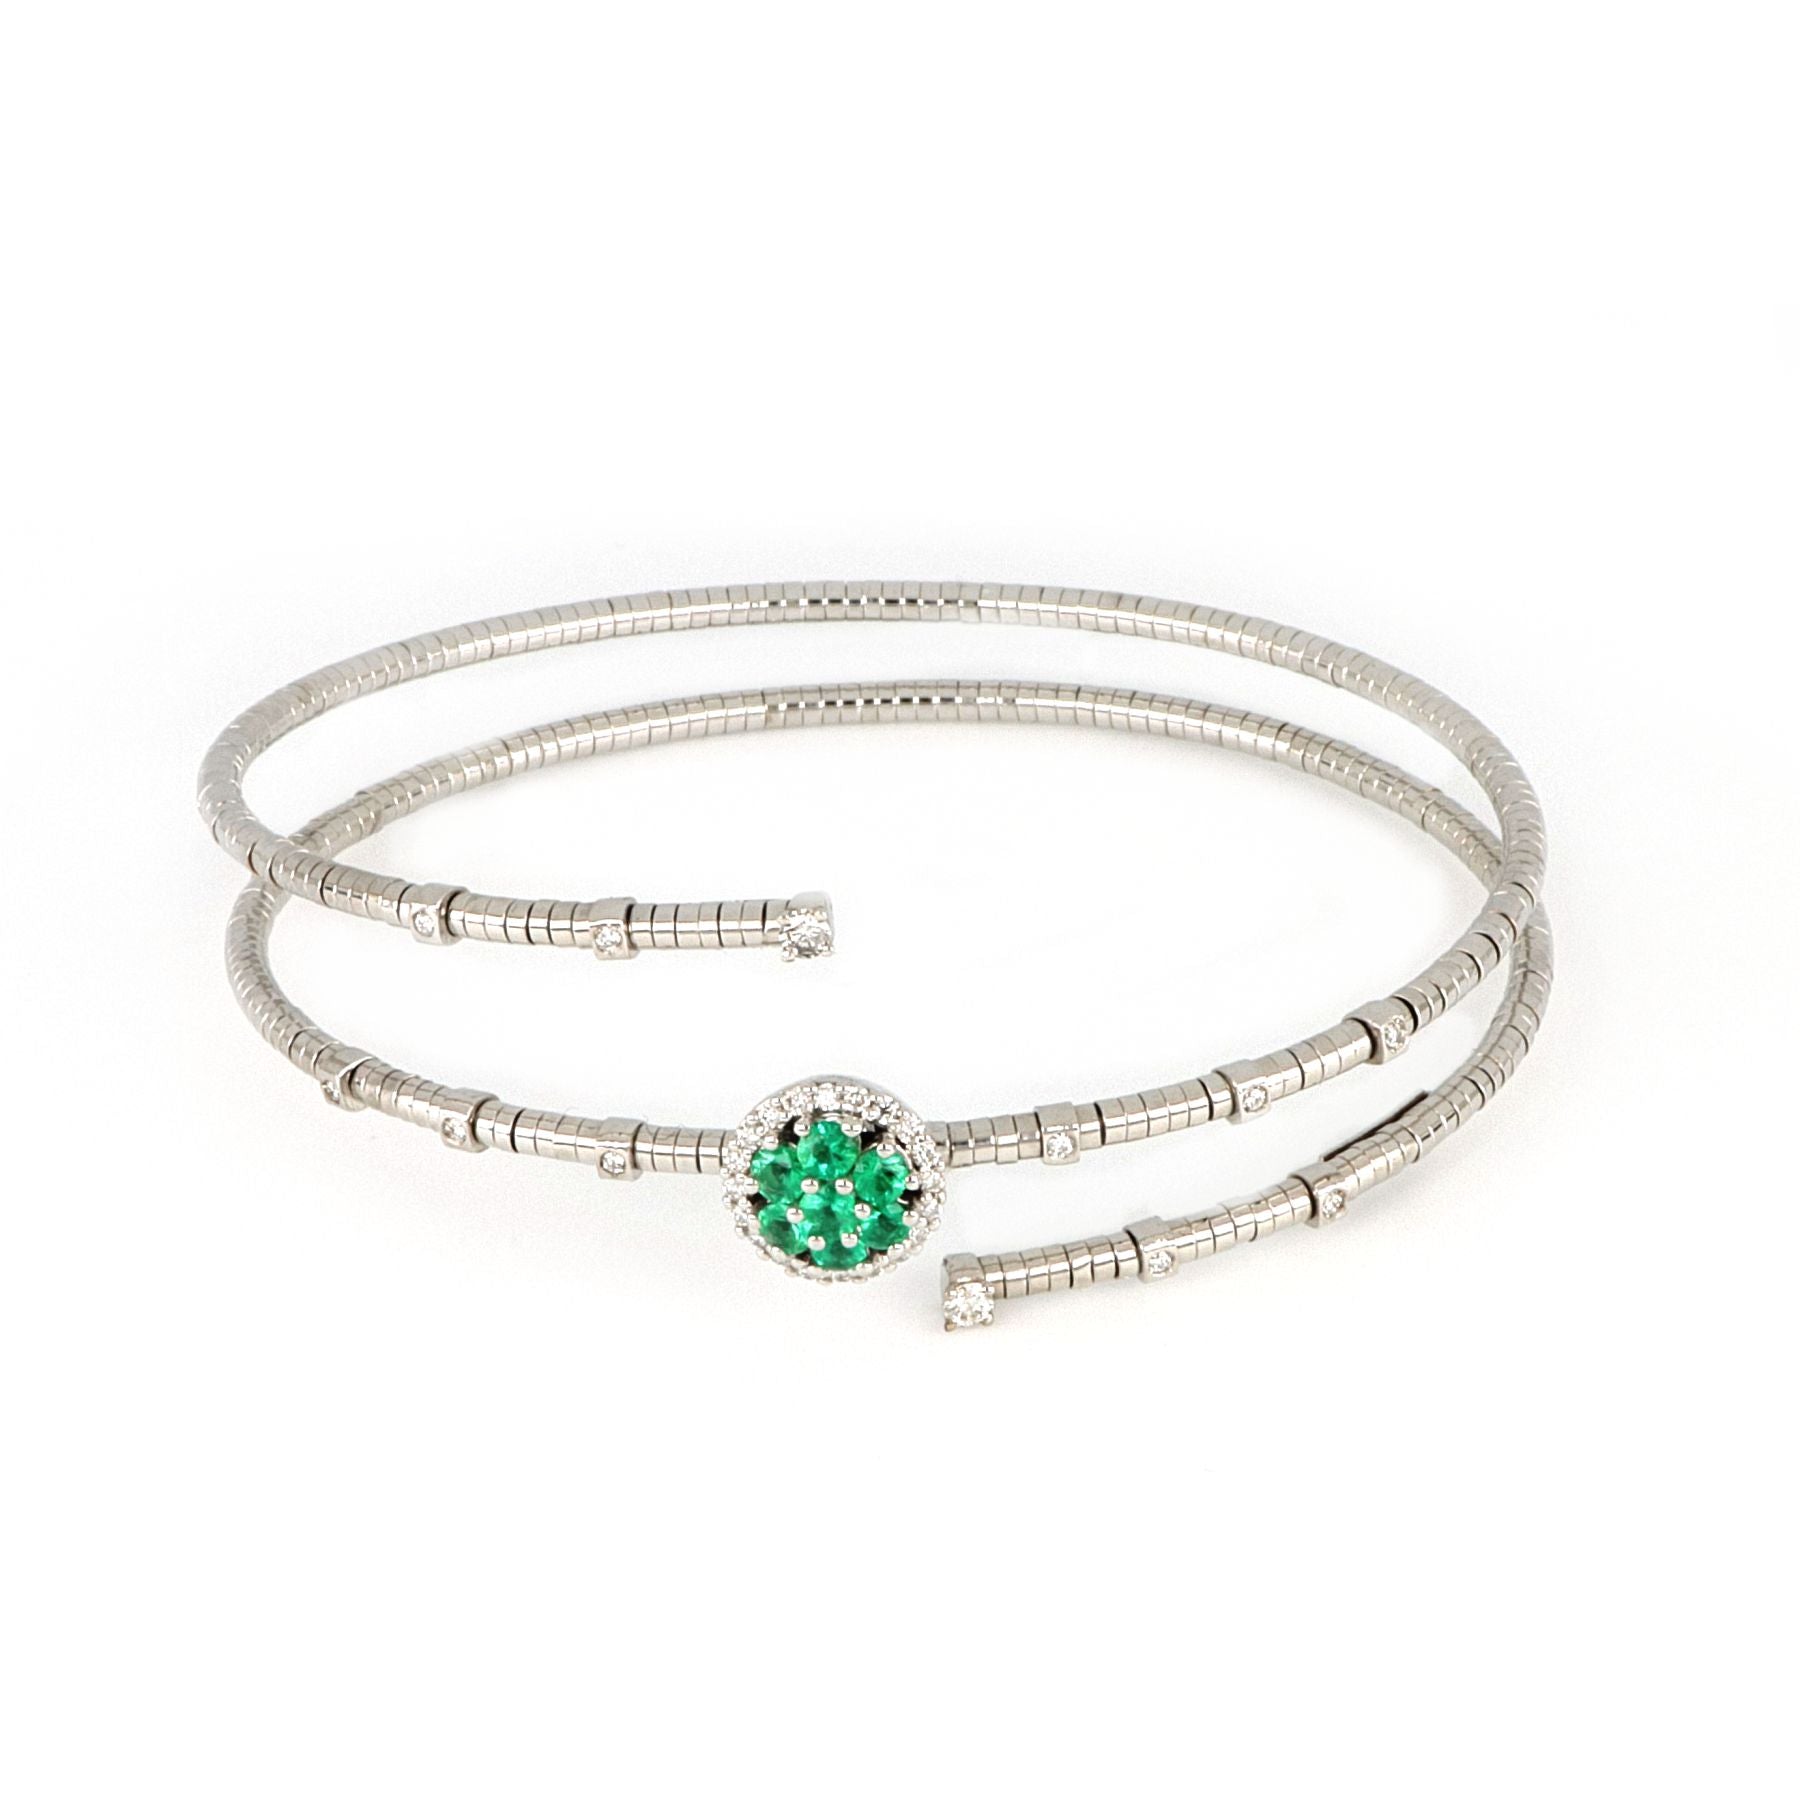 White Gold Bracelet With Emeralds And Diamonds